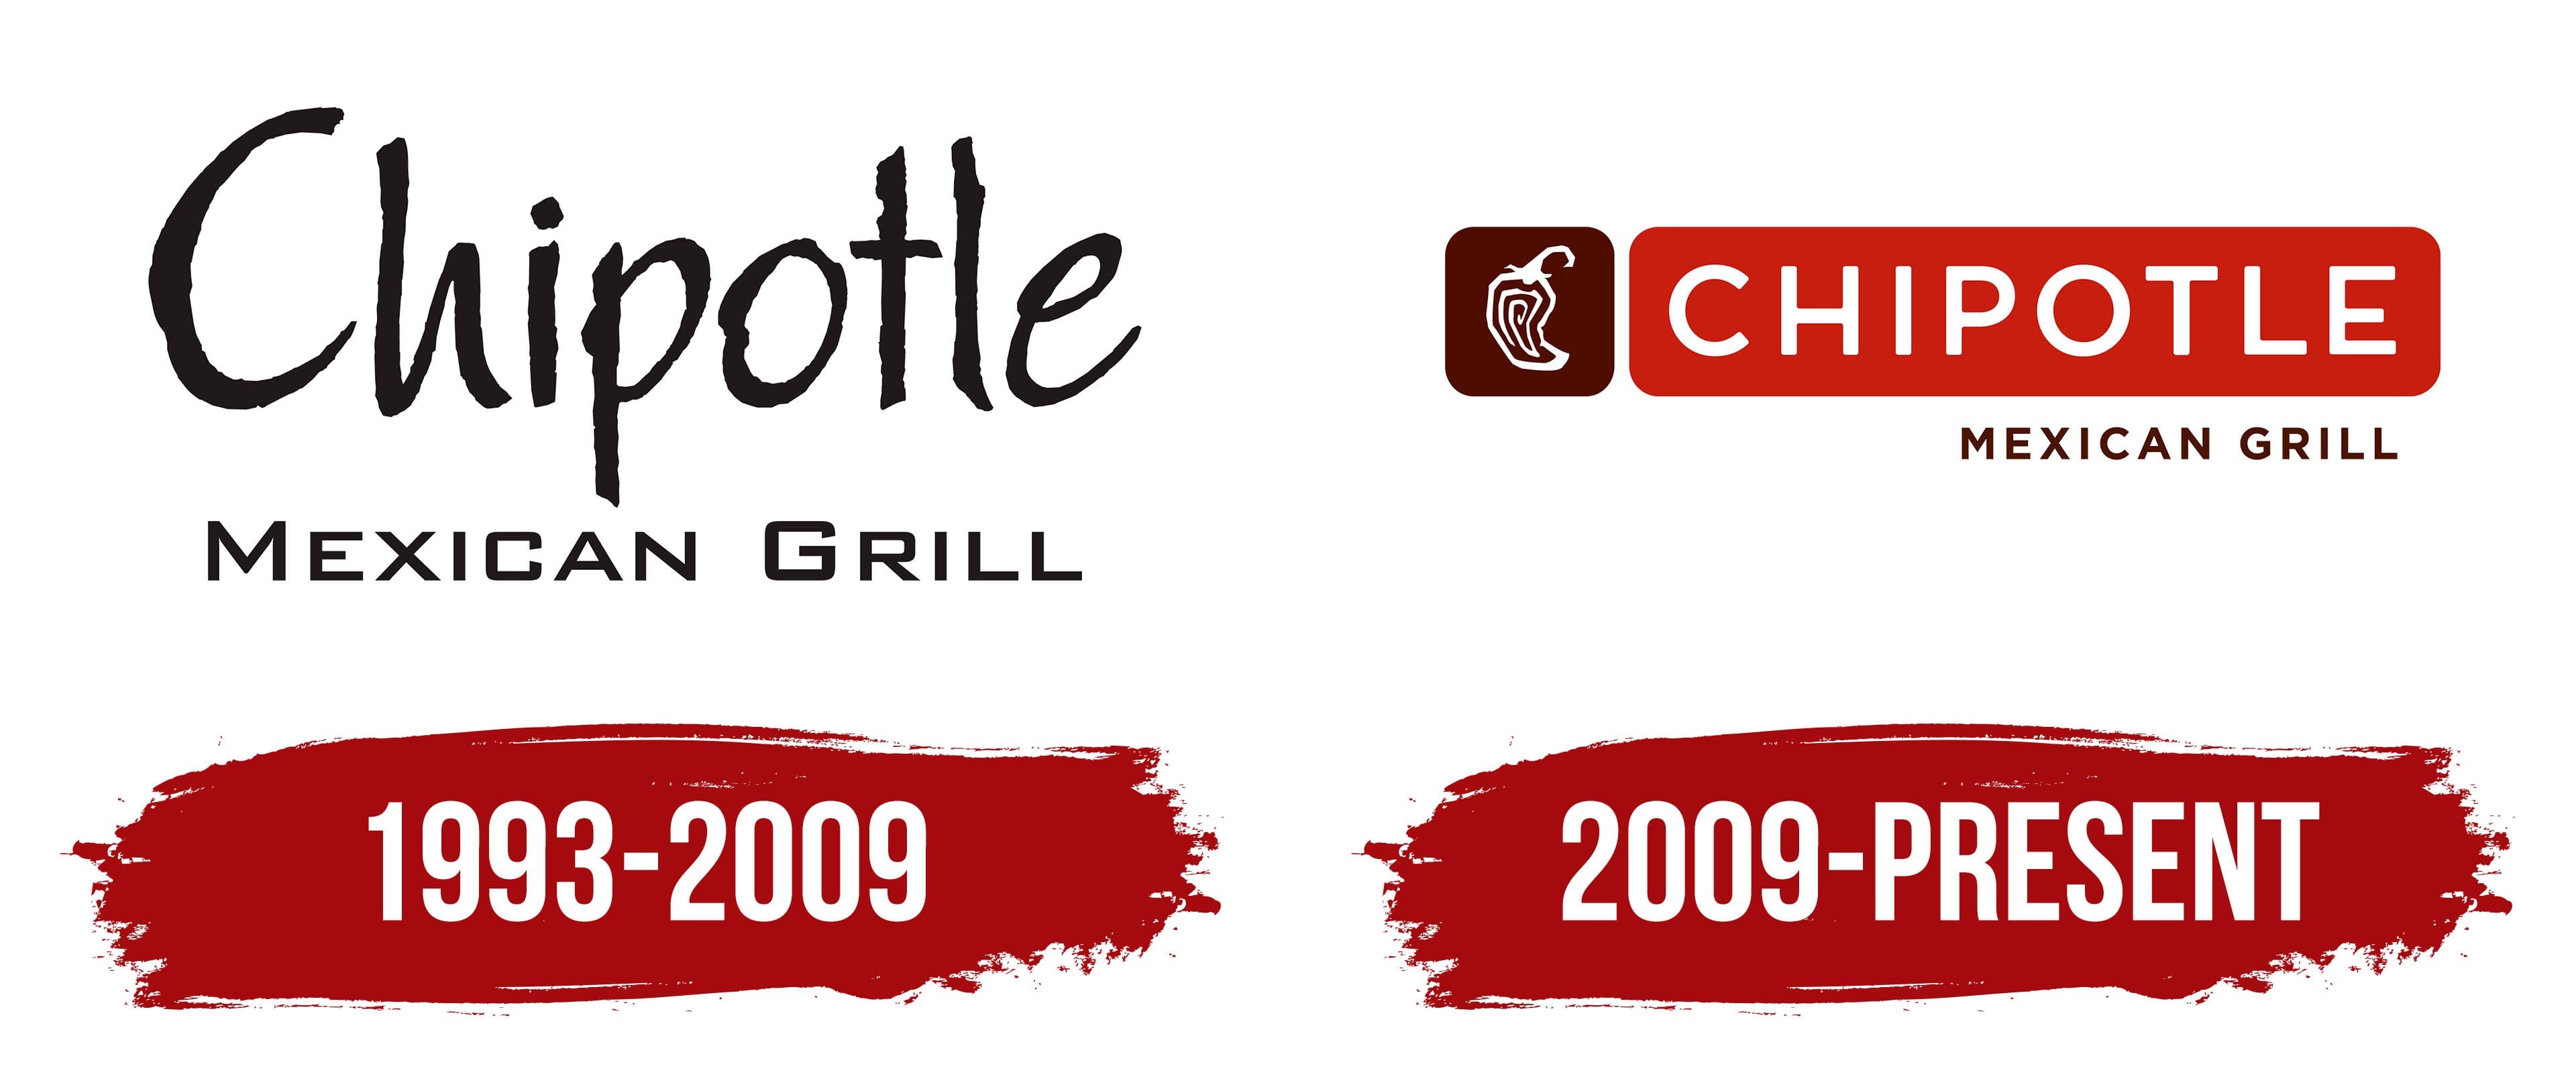 Chipotle: Brand, Logo evolution, The earliest Chipotle emblem, 1993-2009. 3840x1630 Dual Screen Background.